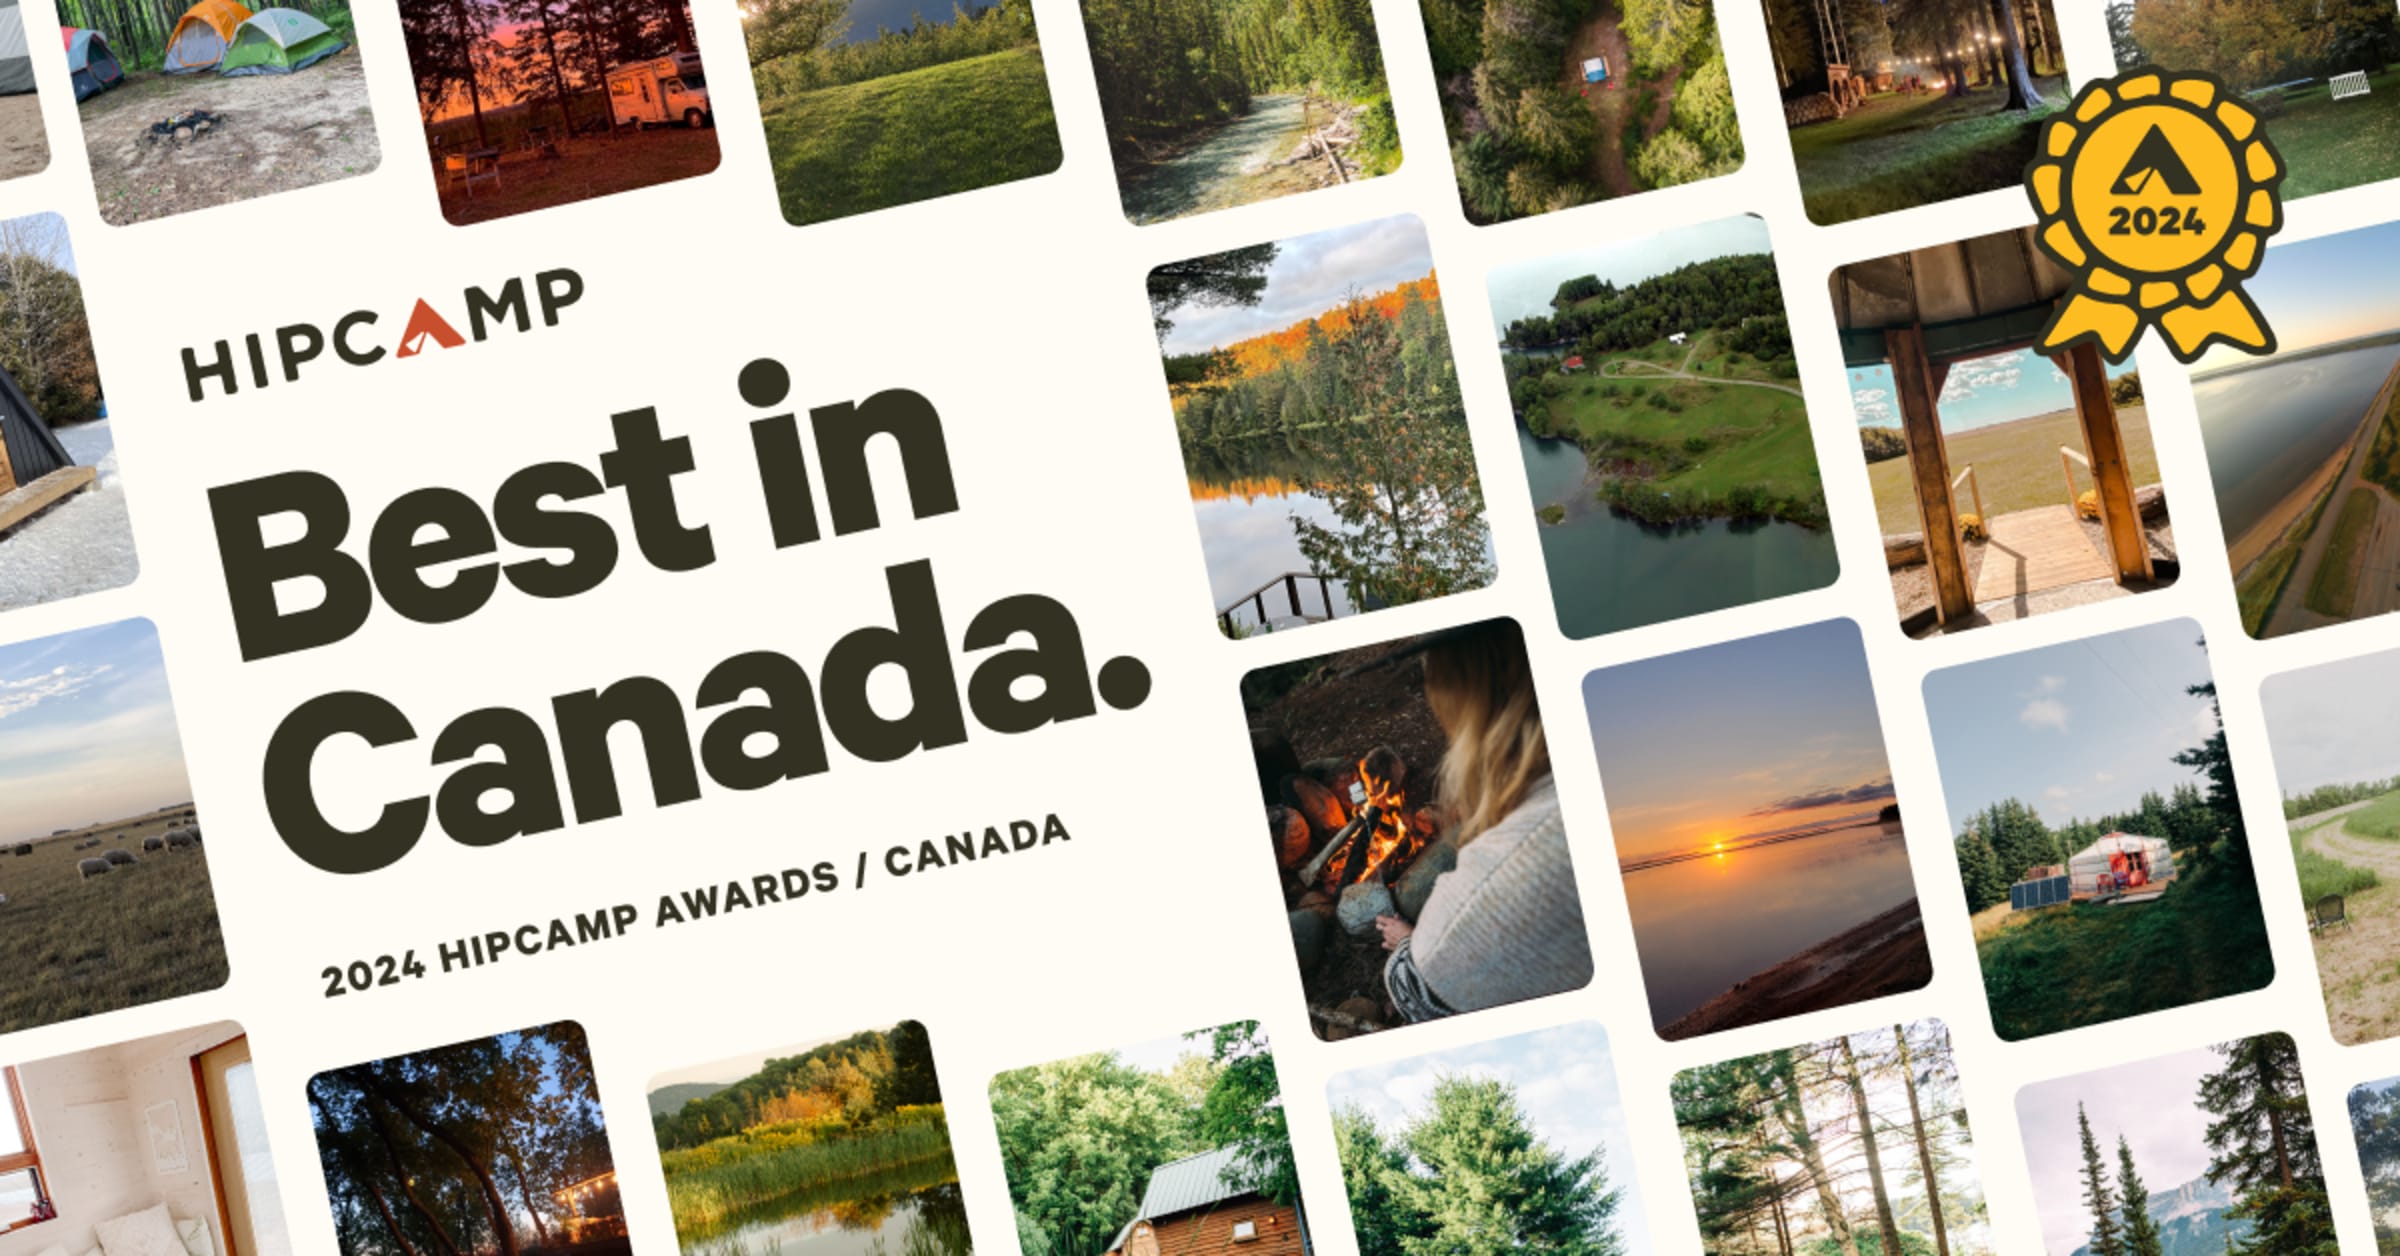 Hipcamp Awards 2024: Canada’s Best in Province